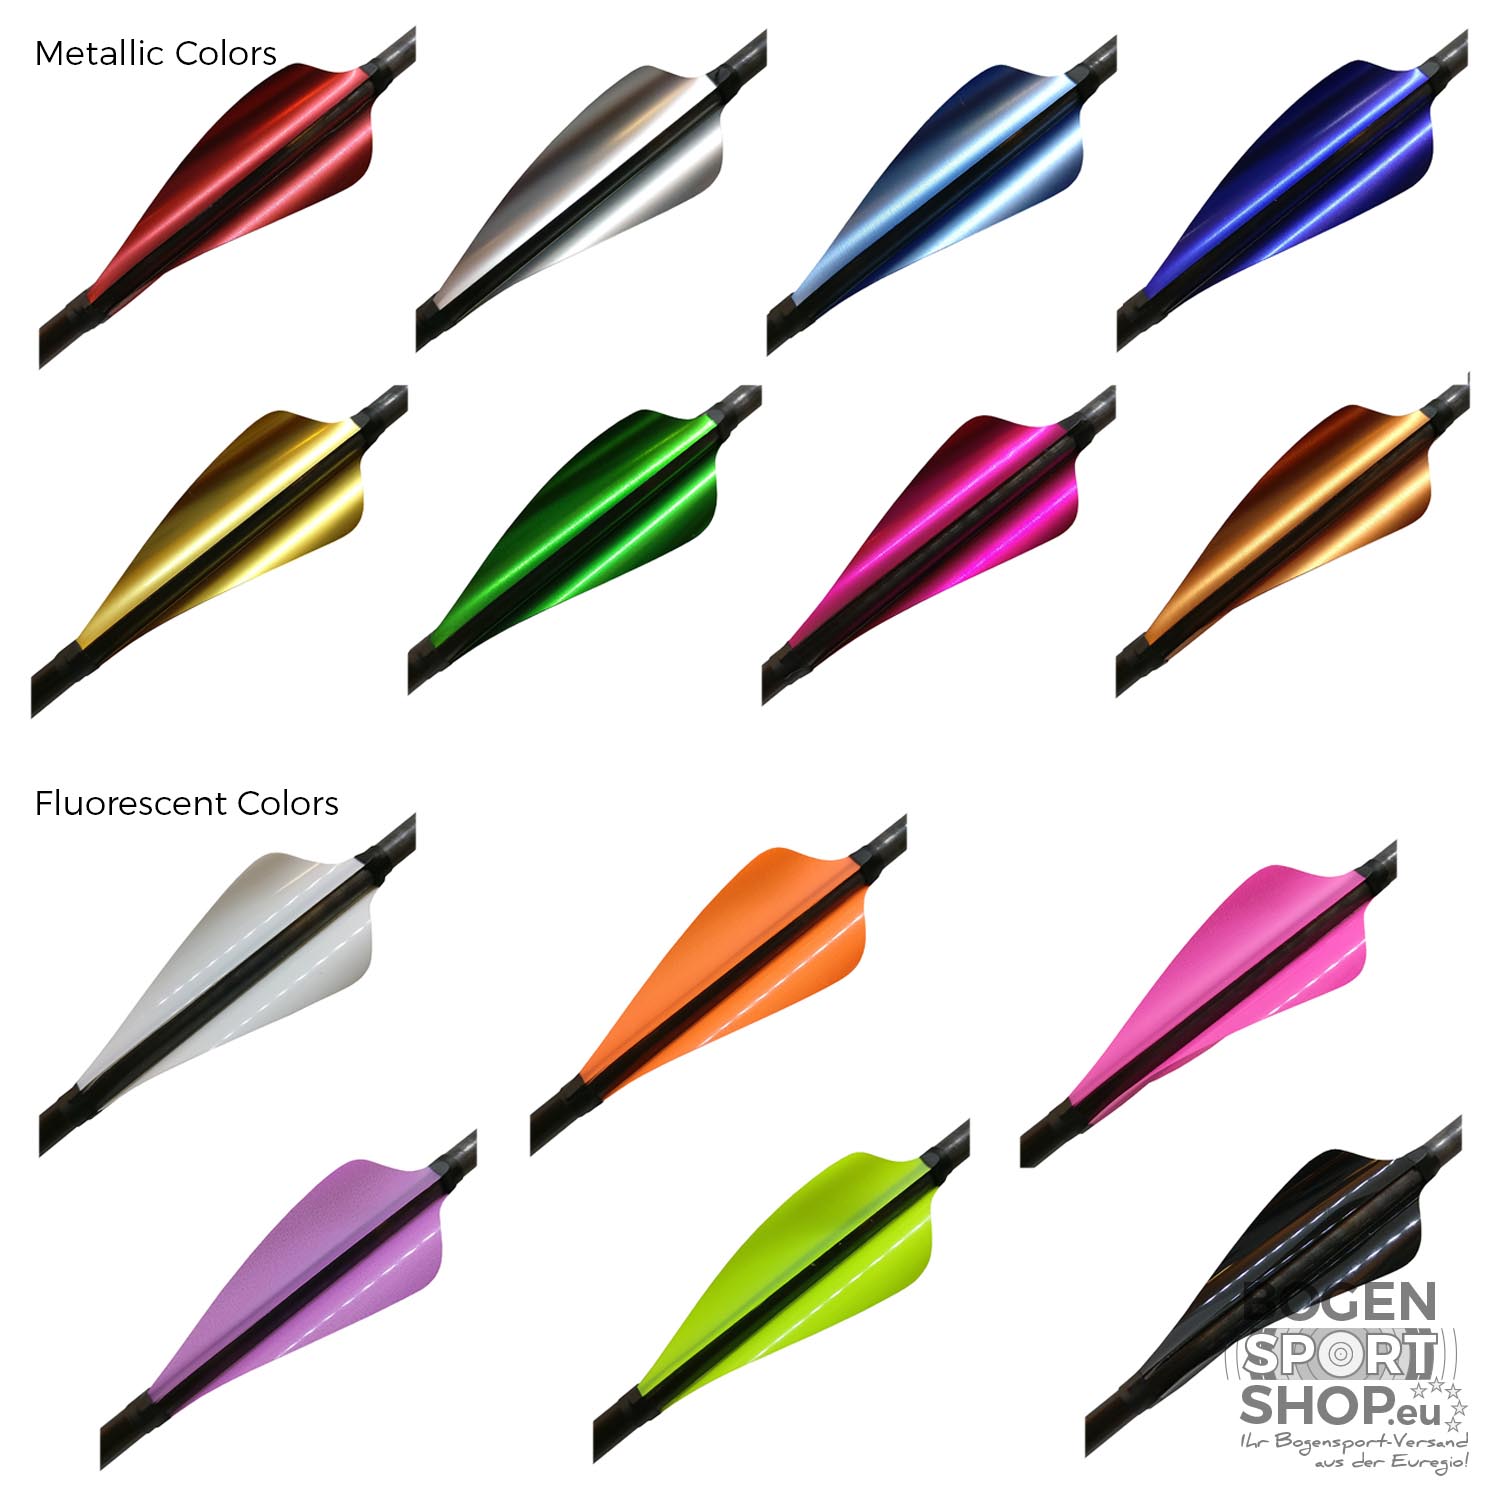 XS Wings Advanced Archery Spin Vanes//Fletchings Recurve or Compound Bows.